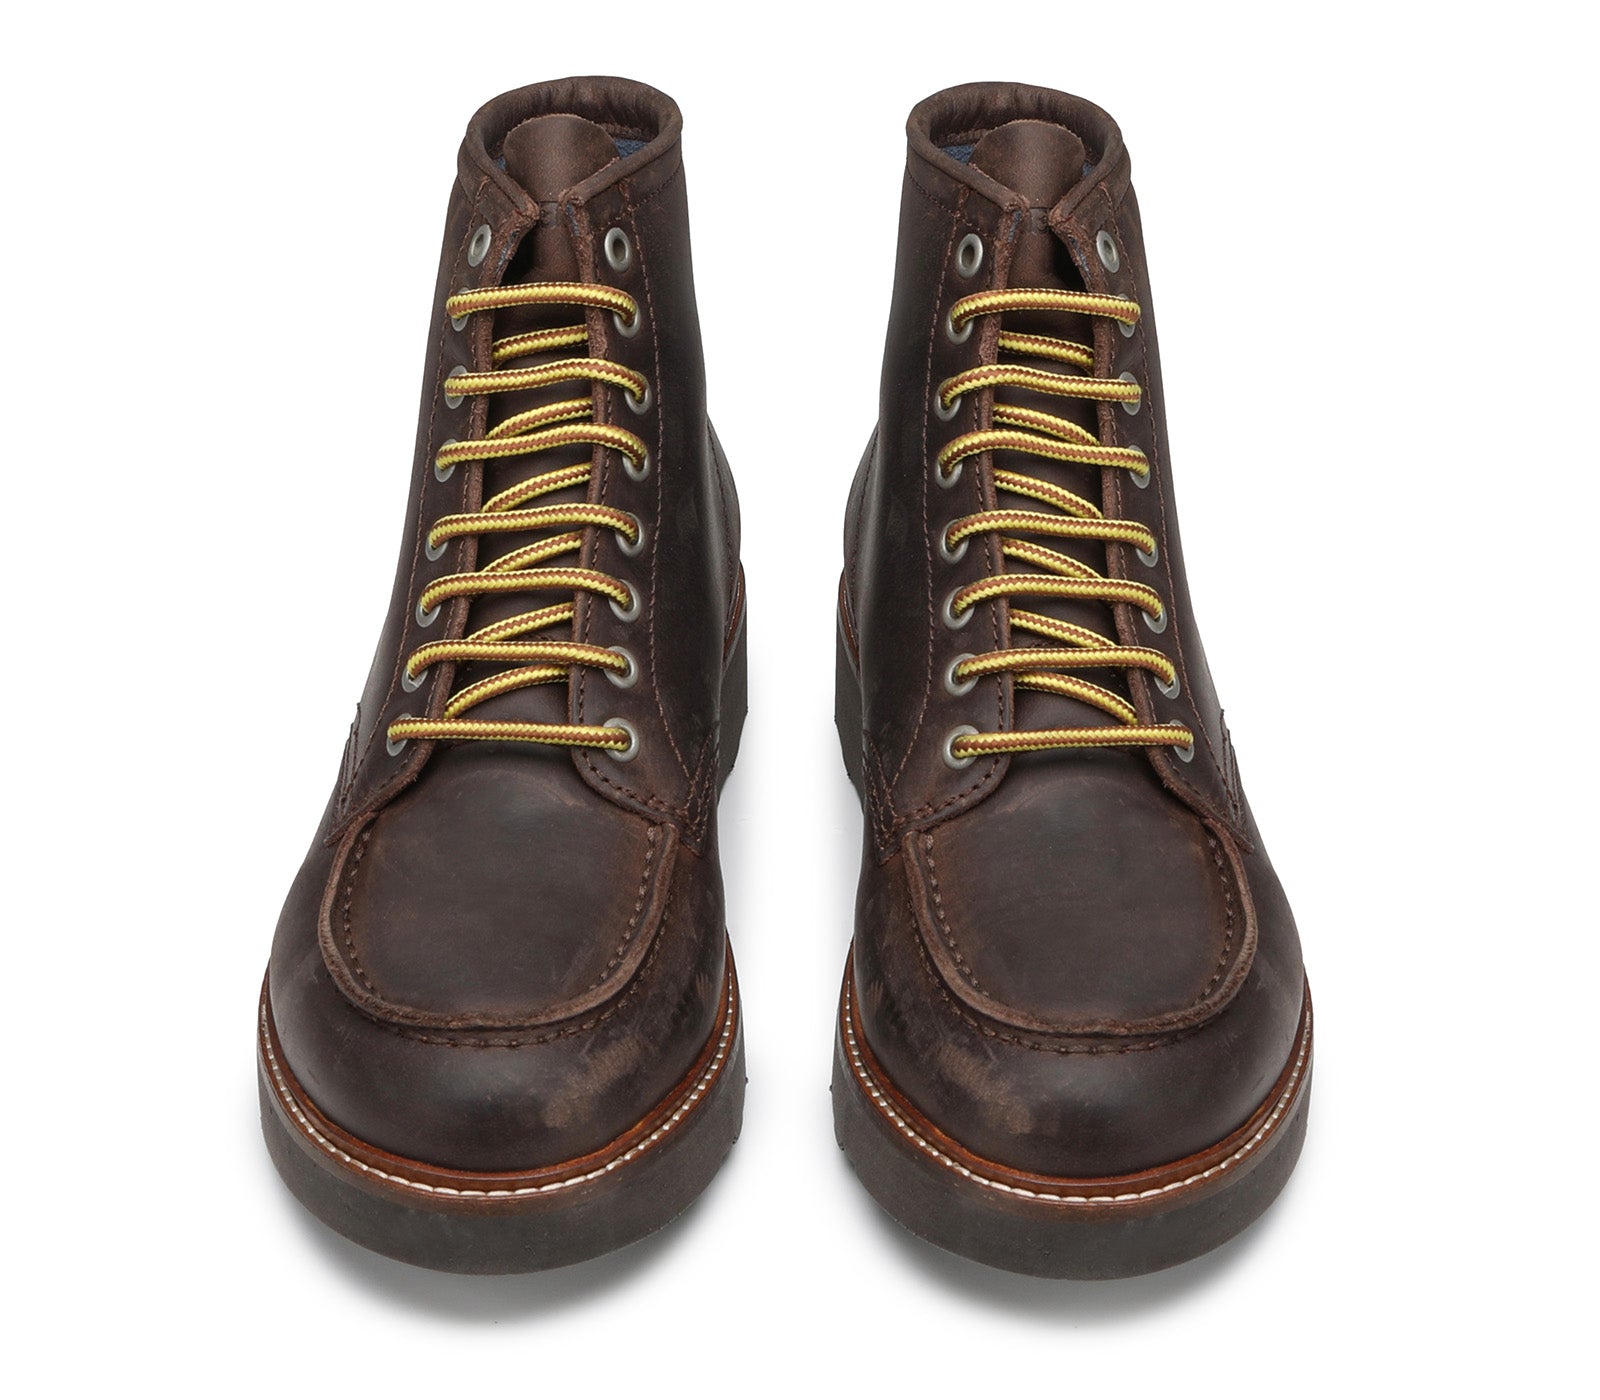 Laced Dark Brown Men's Boot with Brown Rubber Sole